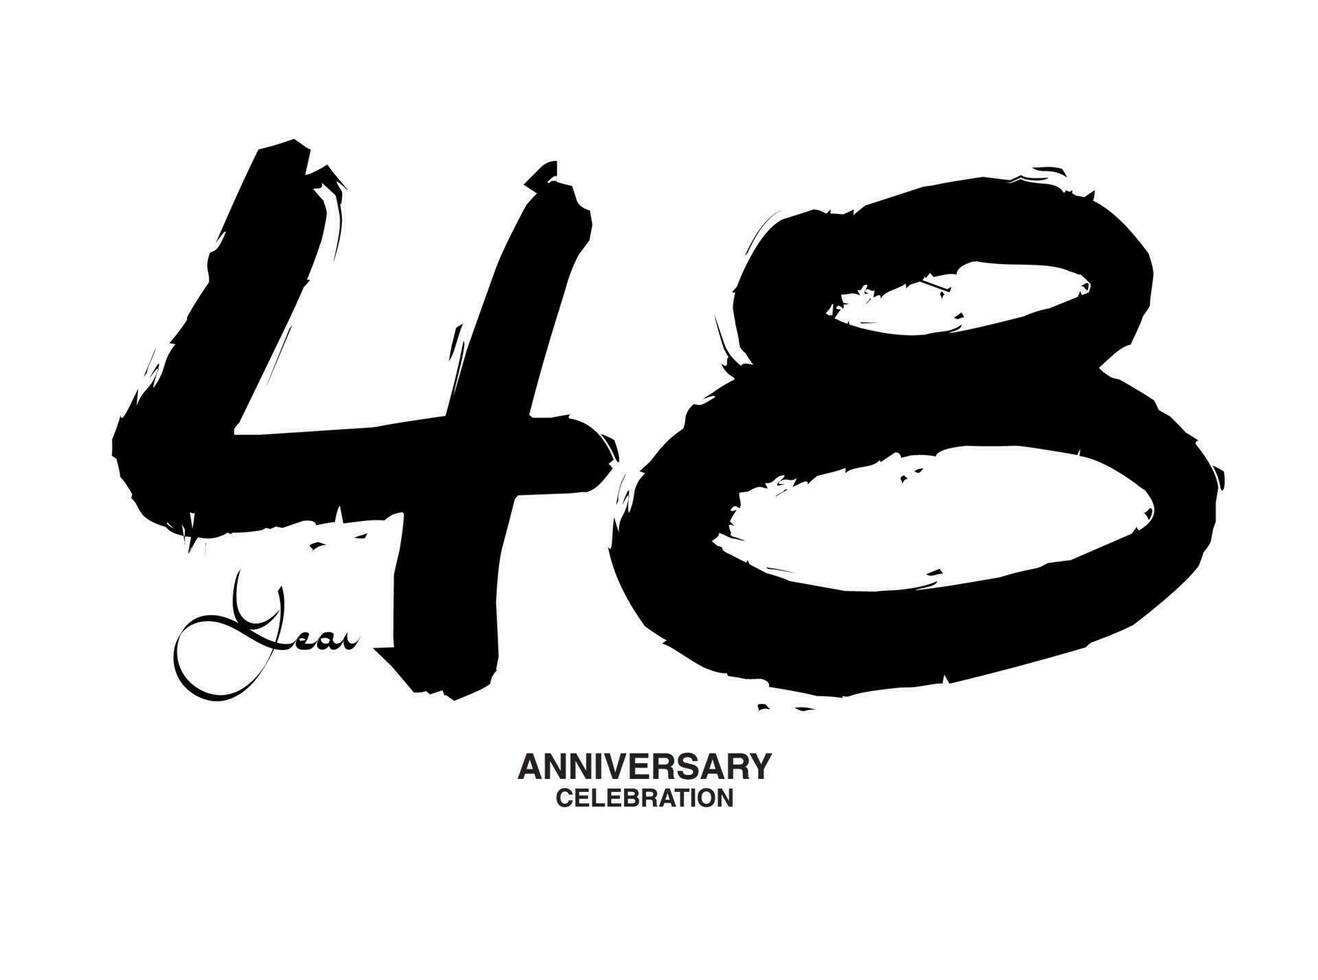 48 Years Anniversary Celebration Vector Template, 48 number logo design, 48th birthday, Black Lettering Numbers brush drawing hand drawn sketch, black number, Anniversary vector illustration